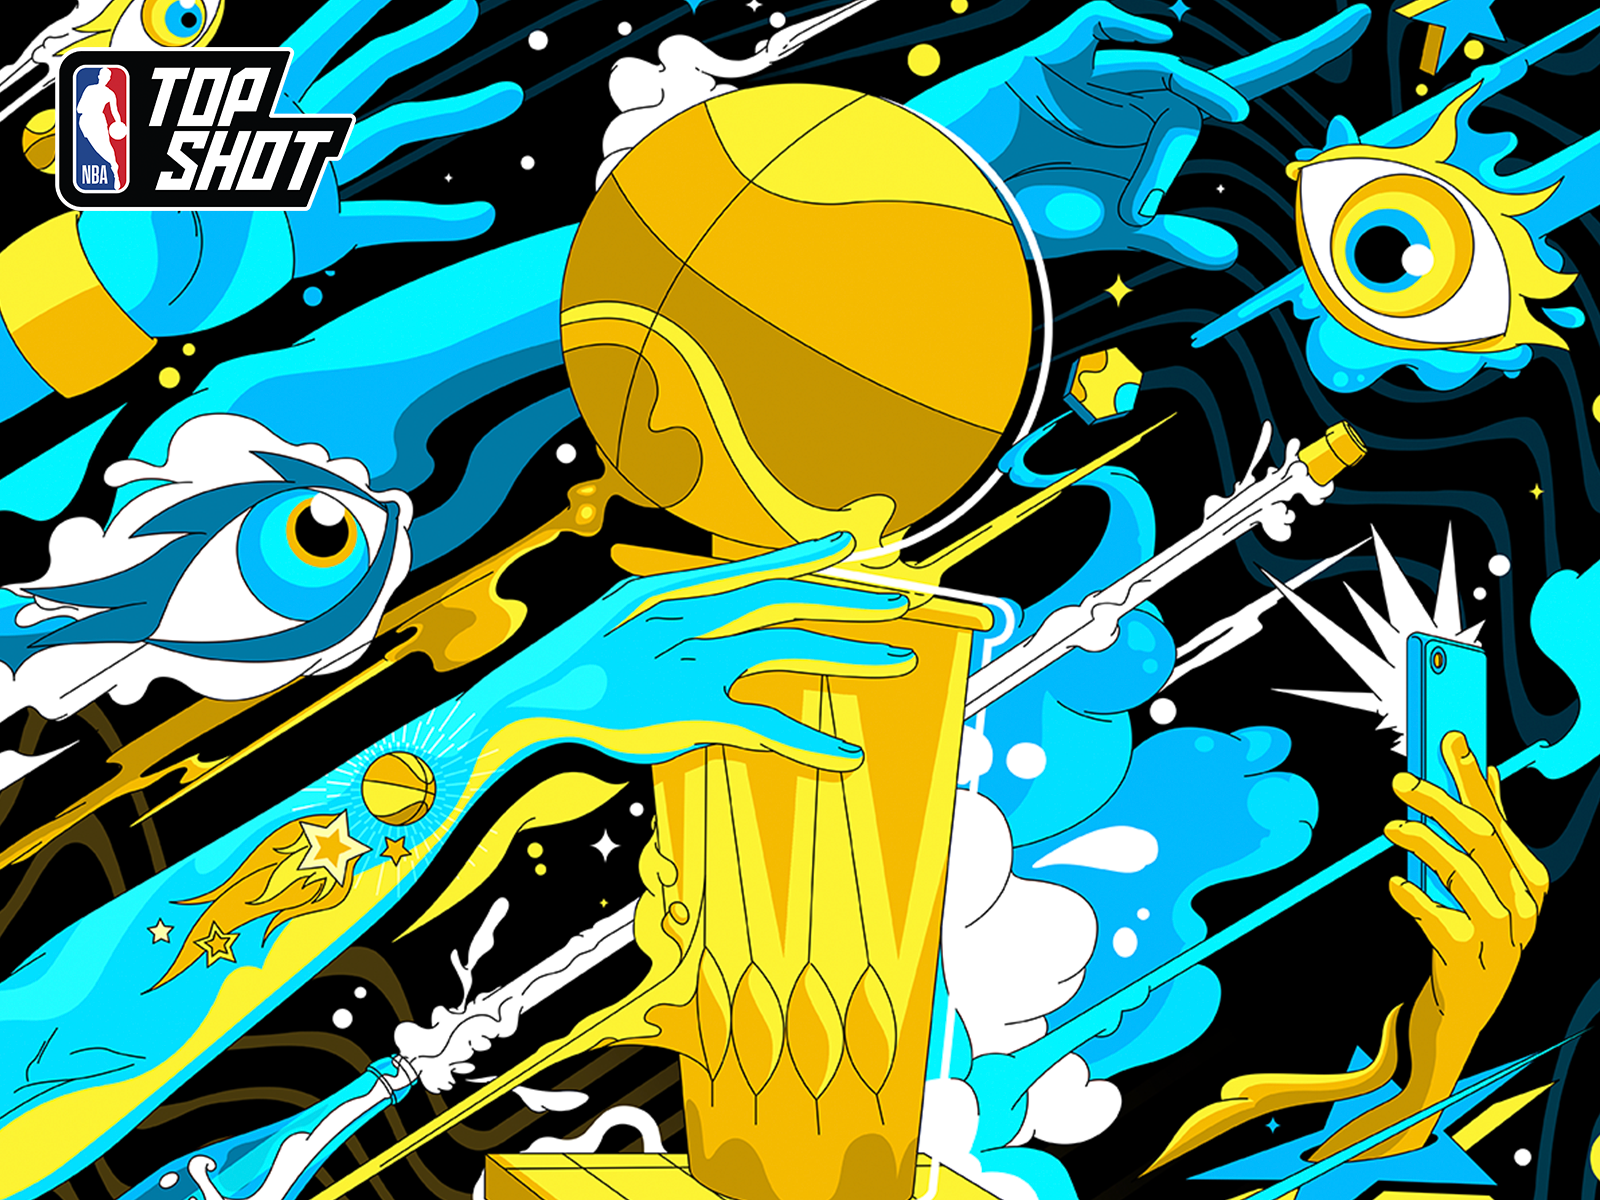 NBA Top Shot - Moments by Dapper Labs on Dribbble